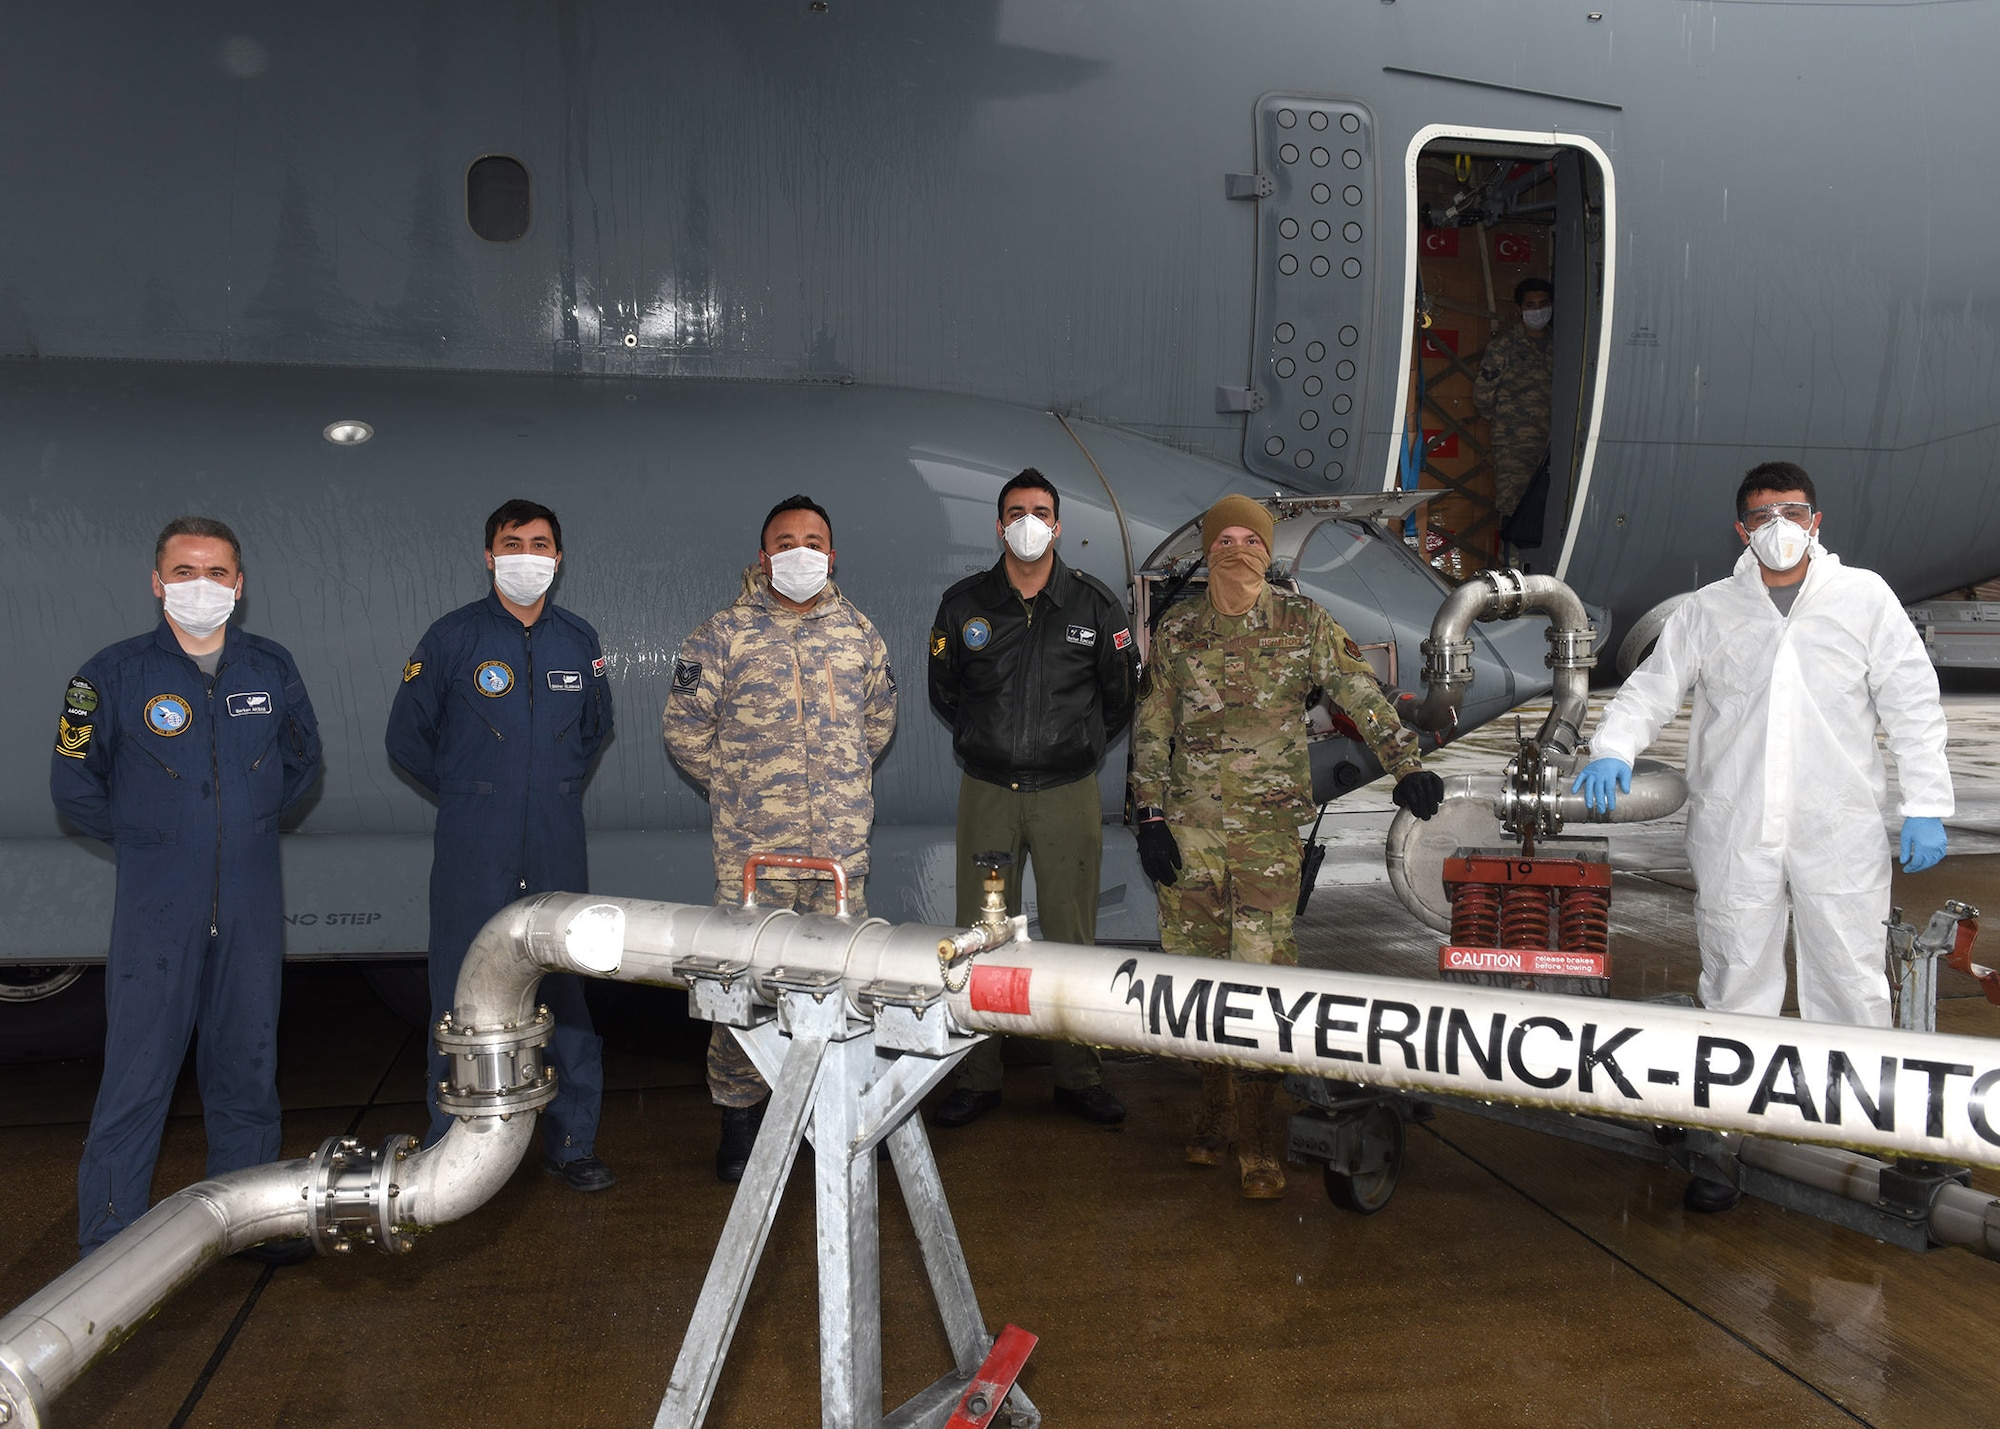 Turkish air force aircrew and Team Mildenhall Airmen pose for a photo during ground refueling of a Turkish Airbus A400M Atlas at RAF Mildenhall, England, April 28, 2020. The aircraft and crew were transporting COVID-19 medical supplies to Joint Base Andrews, Md., including goggles, gloves, masks and protective clothing. Airmen from RAF Mildenhall were ready and waiting to assist the crew and refuel the aircraft, demonstrating our mutual support of NATO allies during this difficult time. (U.S. Air Force photo by Karen Abeyasekere)